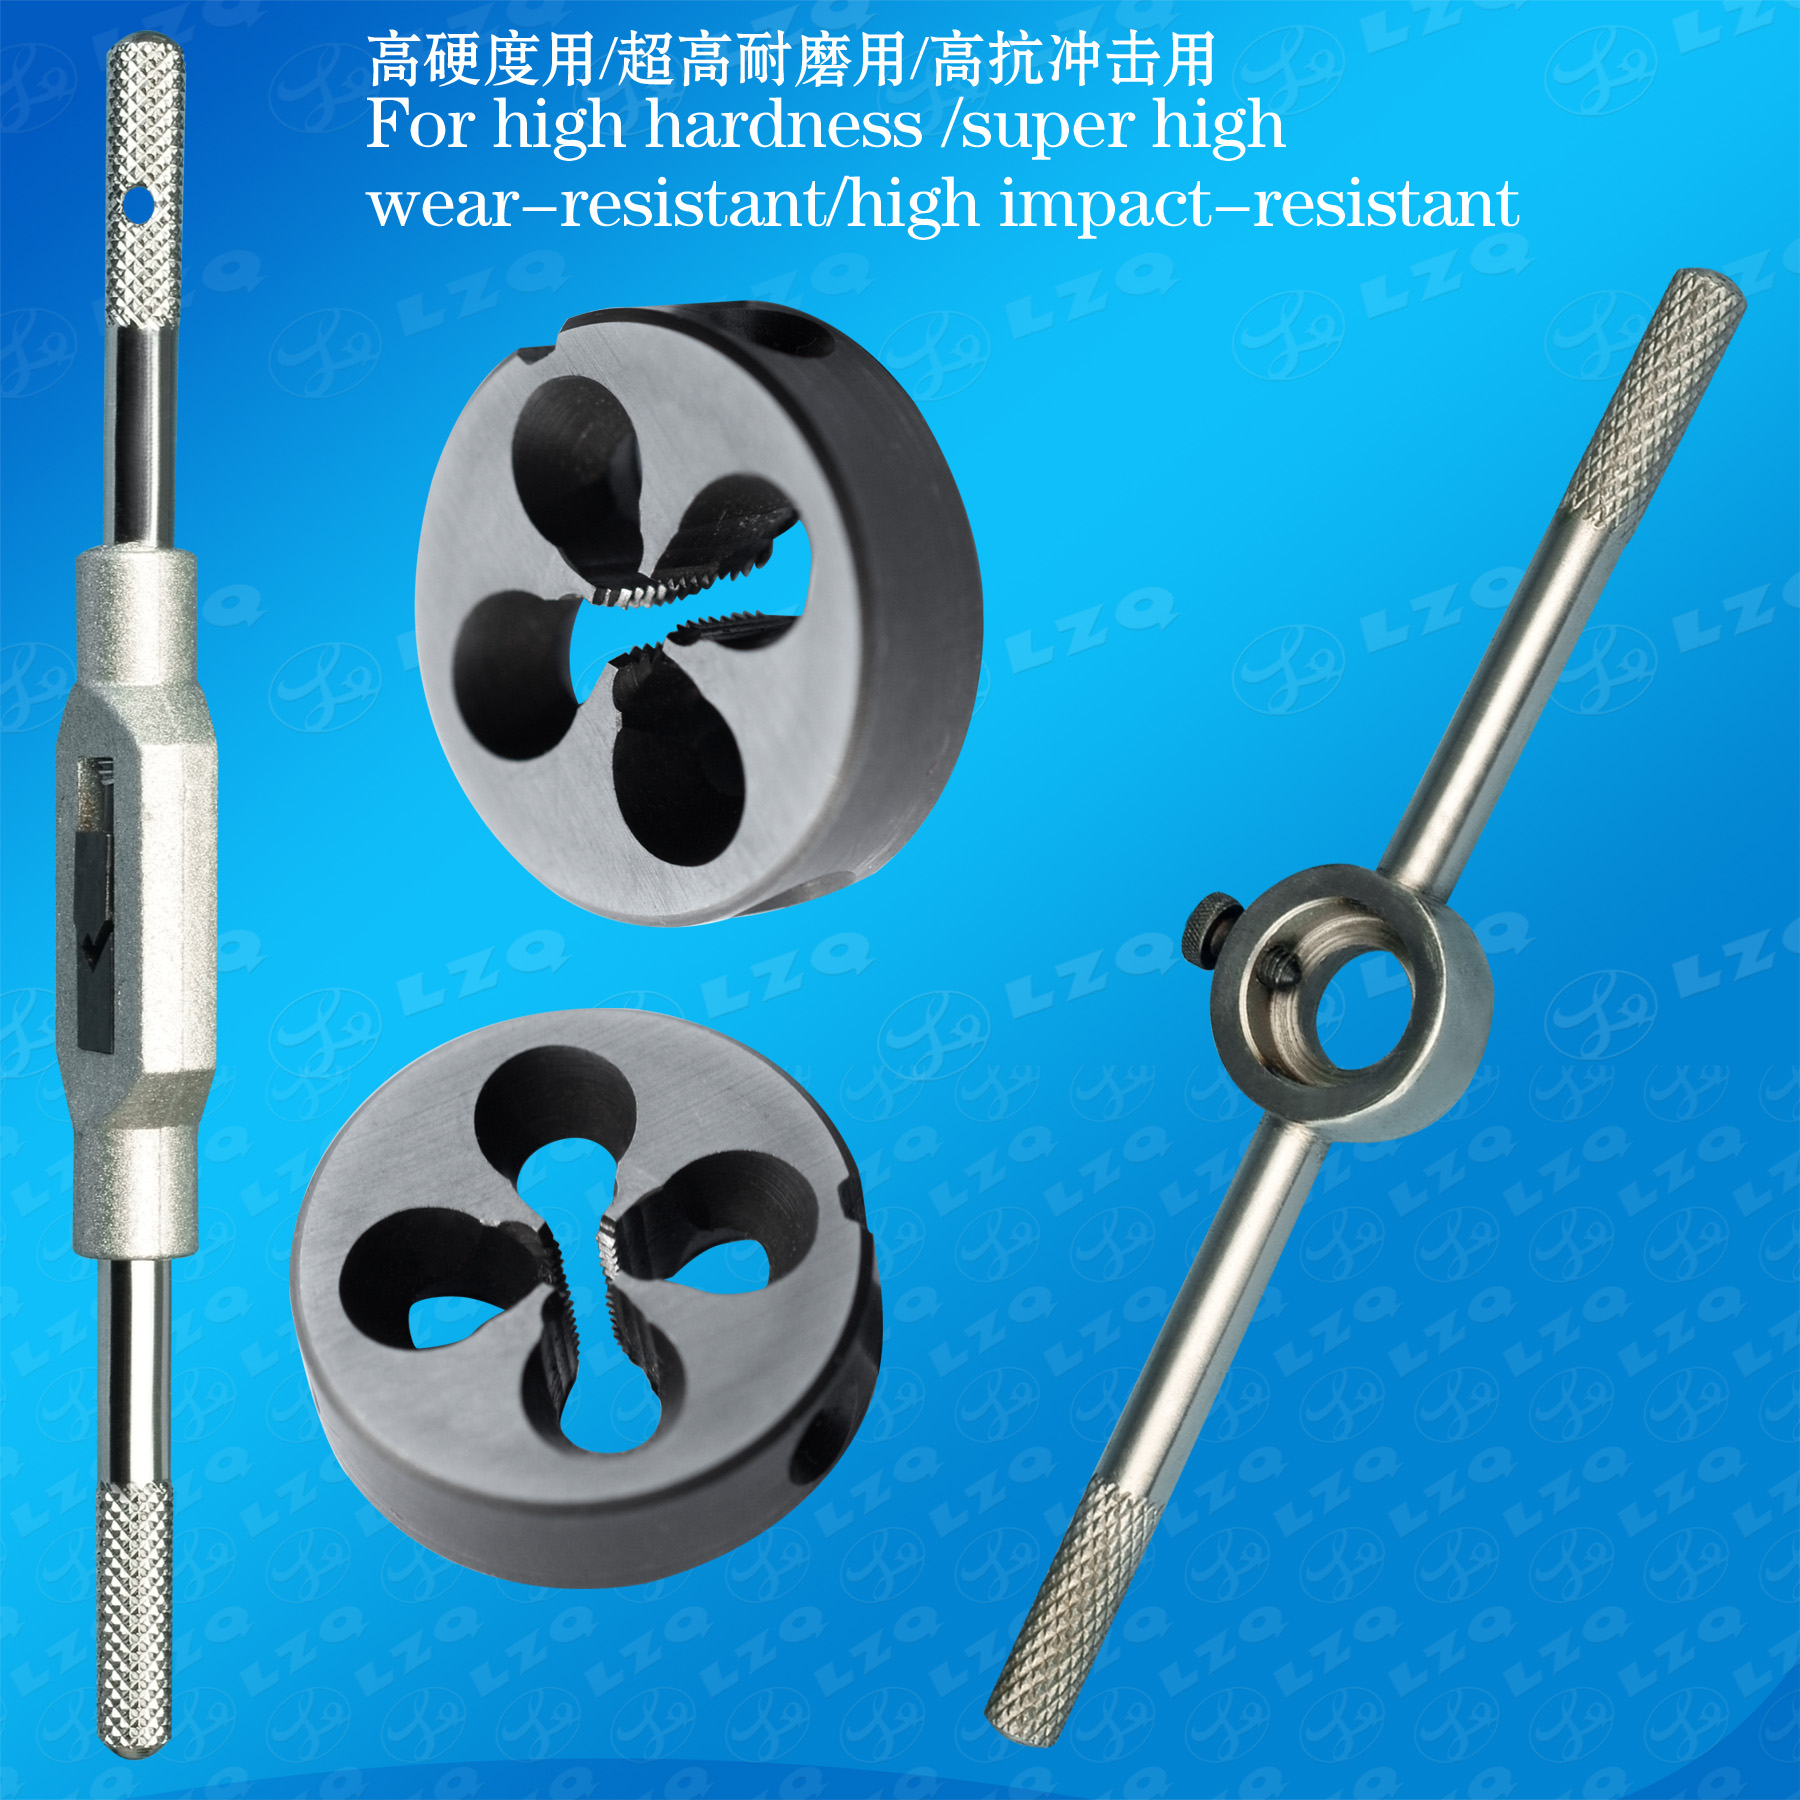 Carbide Screw Tap, Tungsten Steel Screw Tap, Drilling And Tapping Screw Tap